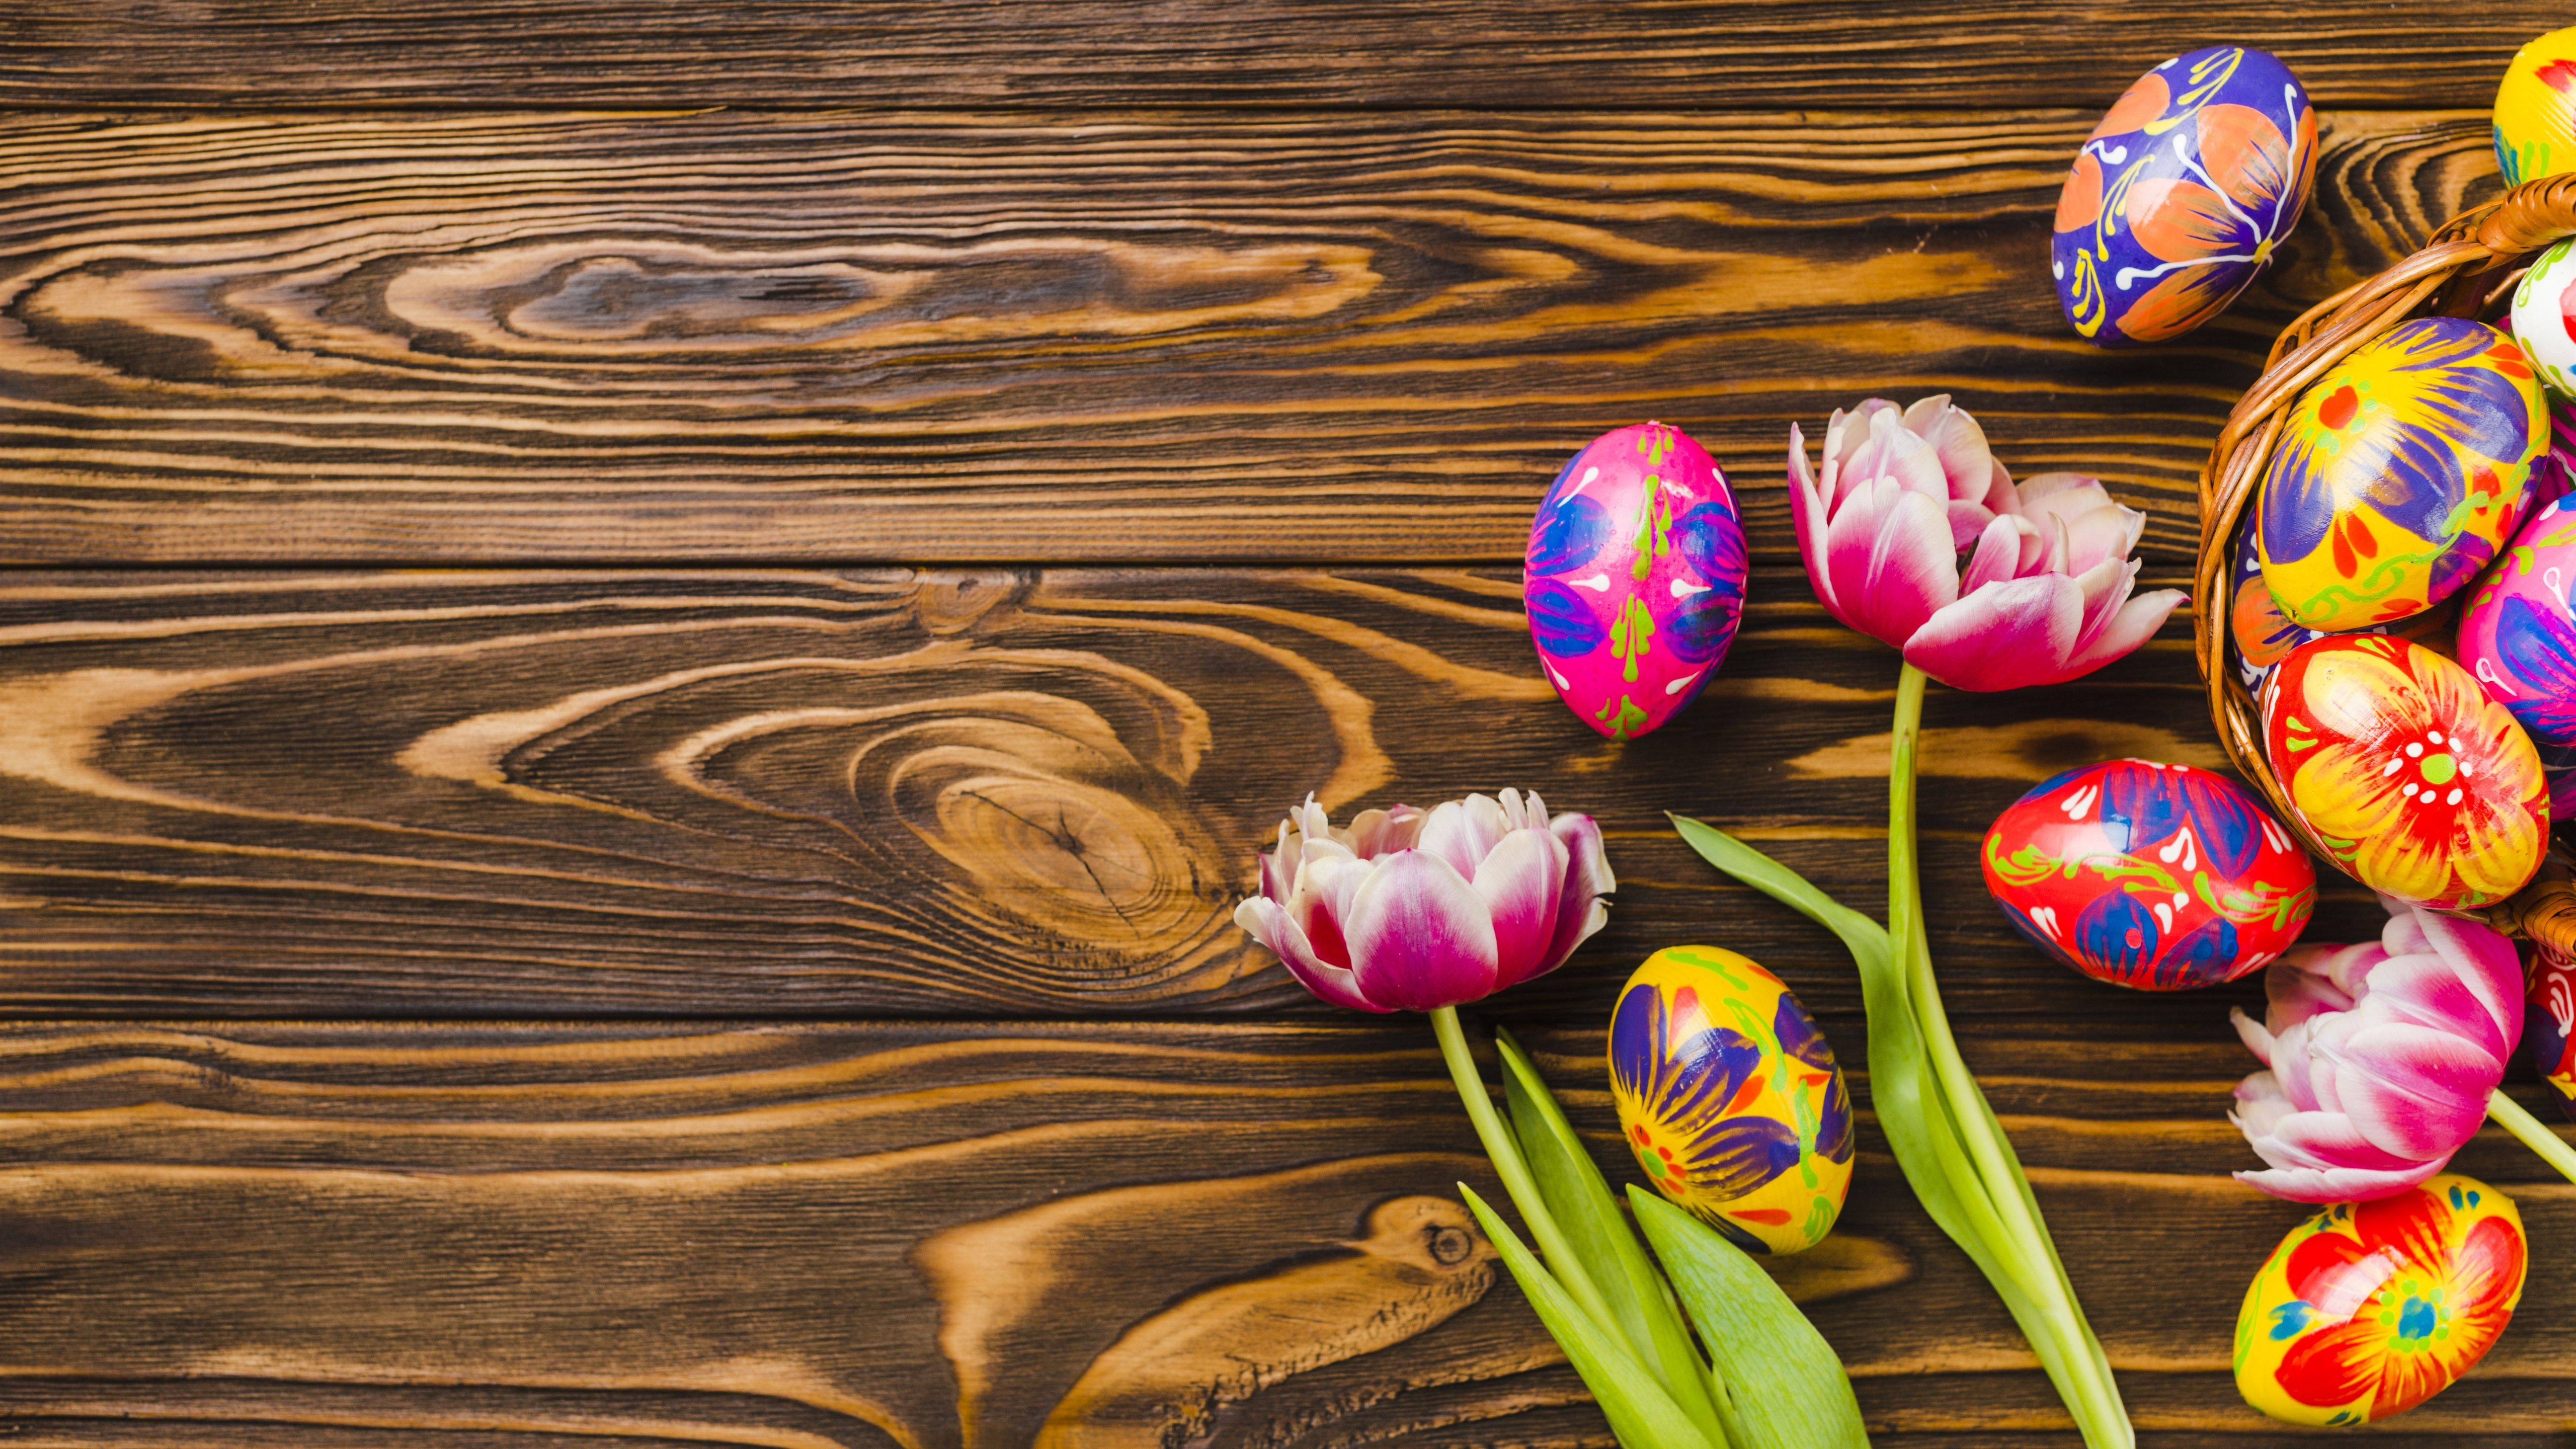 Wallpaper Colorful eggs, Easter, tulips, wood board 5120x2880 UHD 5K Picture, Image